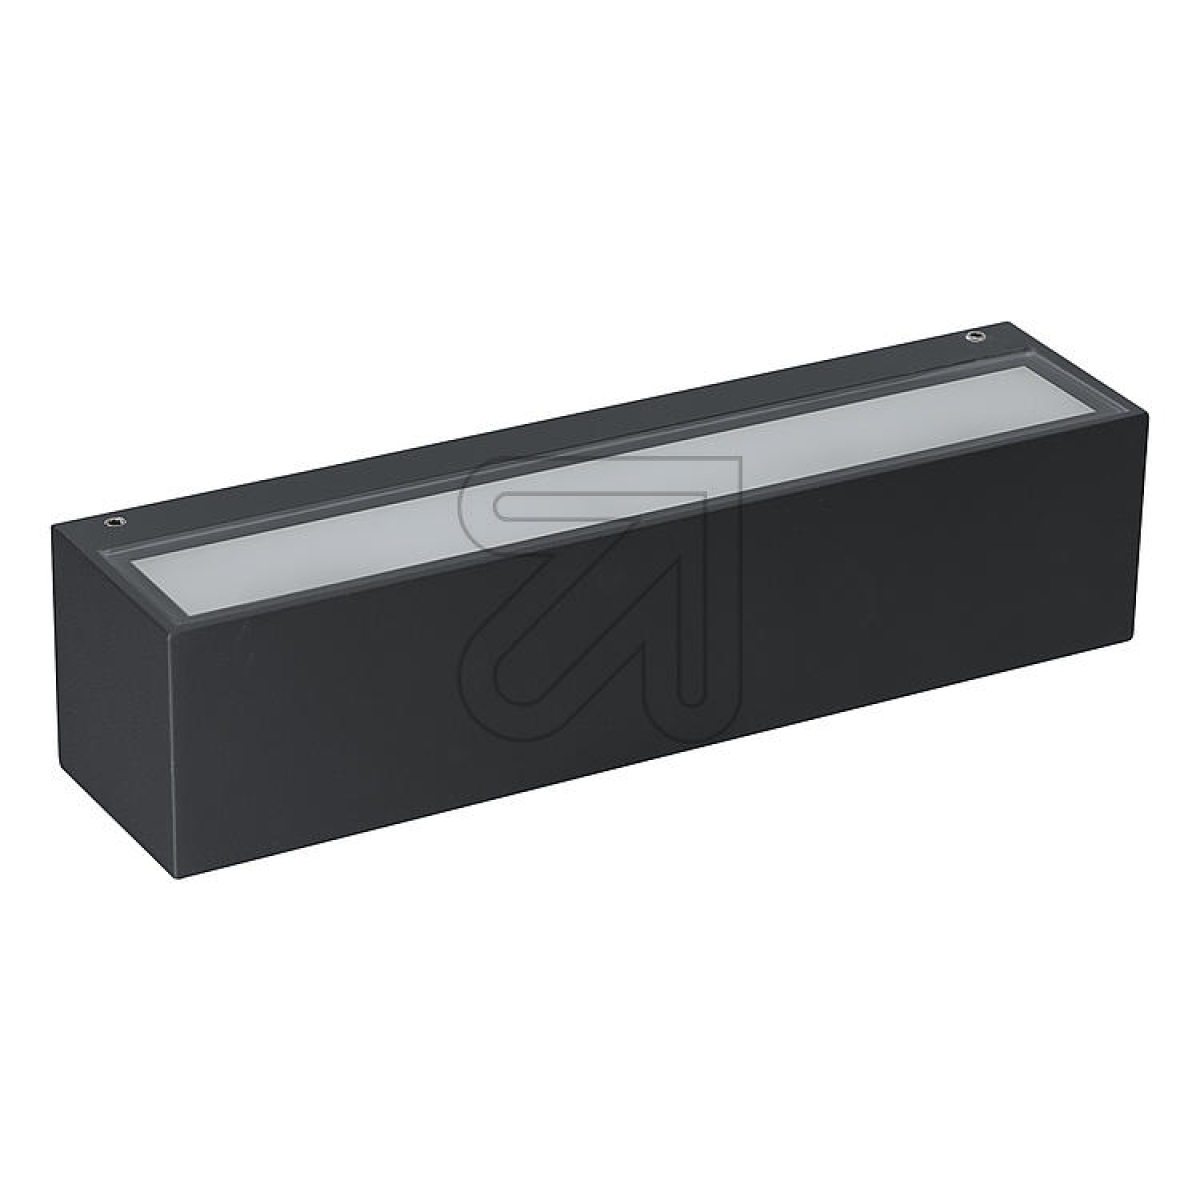 EVNLED wall-mounted light anthracite IP65 3000K 18W WAUD65181502Article-No: 627550